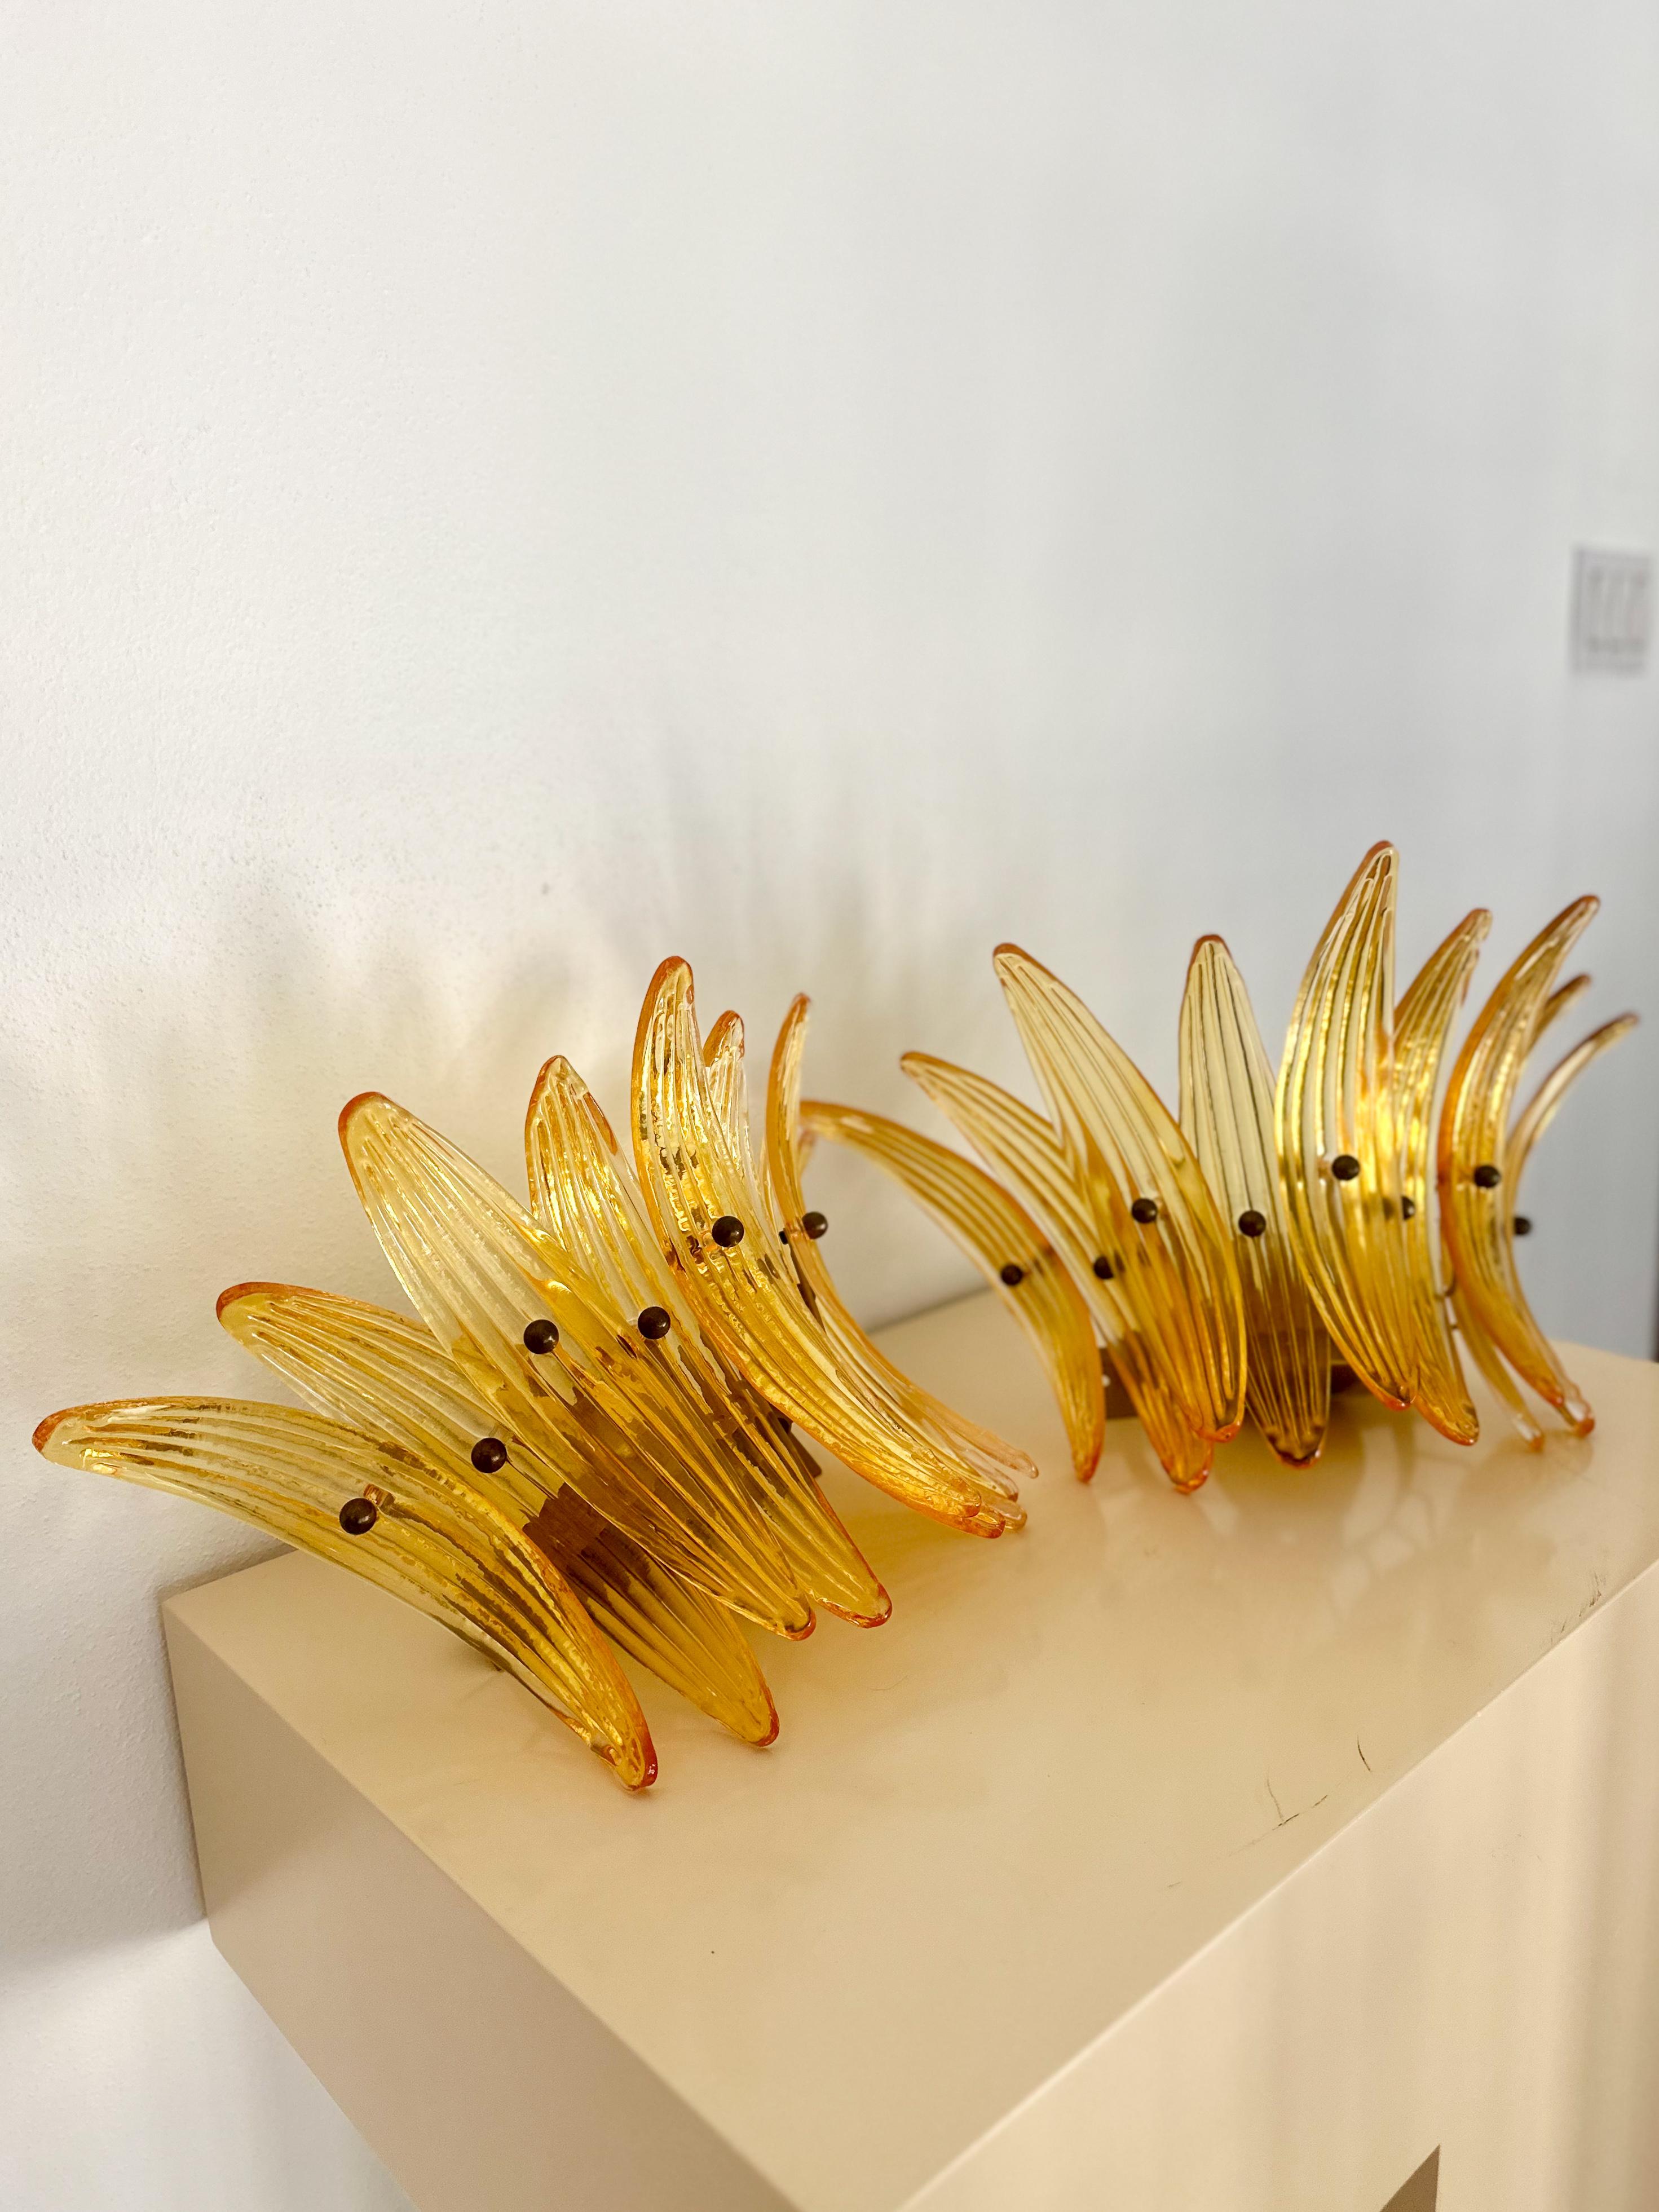 Stunning Italian Murano hand-blown glass 'palmette' wall mounted sconces, c.1990s. Each sconce features 9 concave appliqués made of amber-colored rippled glass, attached to the frame by brass hardware in a palm pattern. Together, the color and